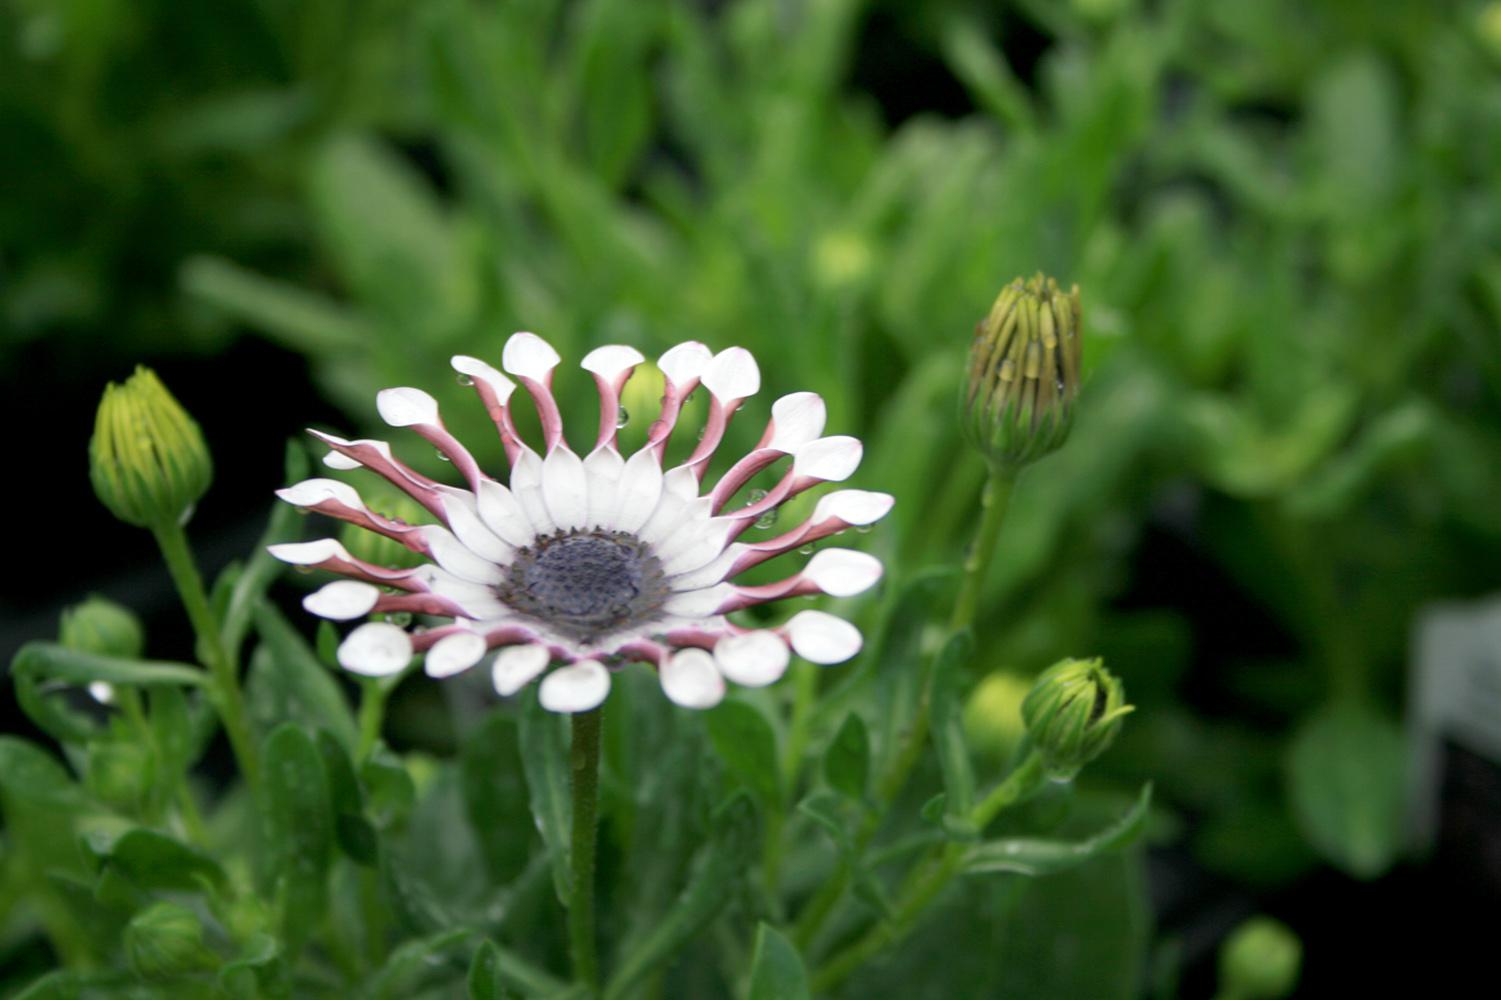 The African daisy Serenity White Bliss (top) has unique, spoon-shaped petals that show the color contrast between the upper and lower surfaces of the petals.